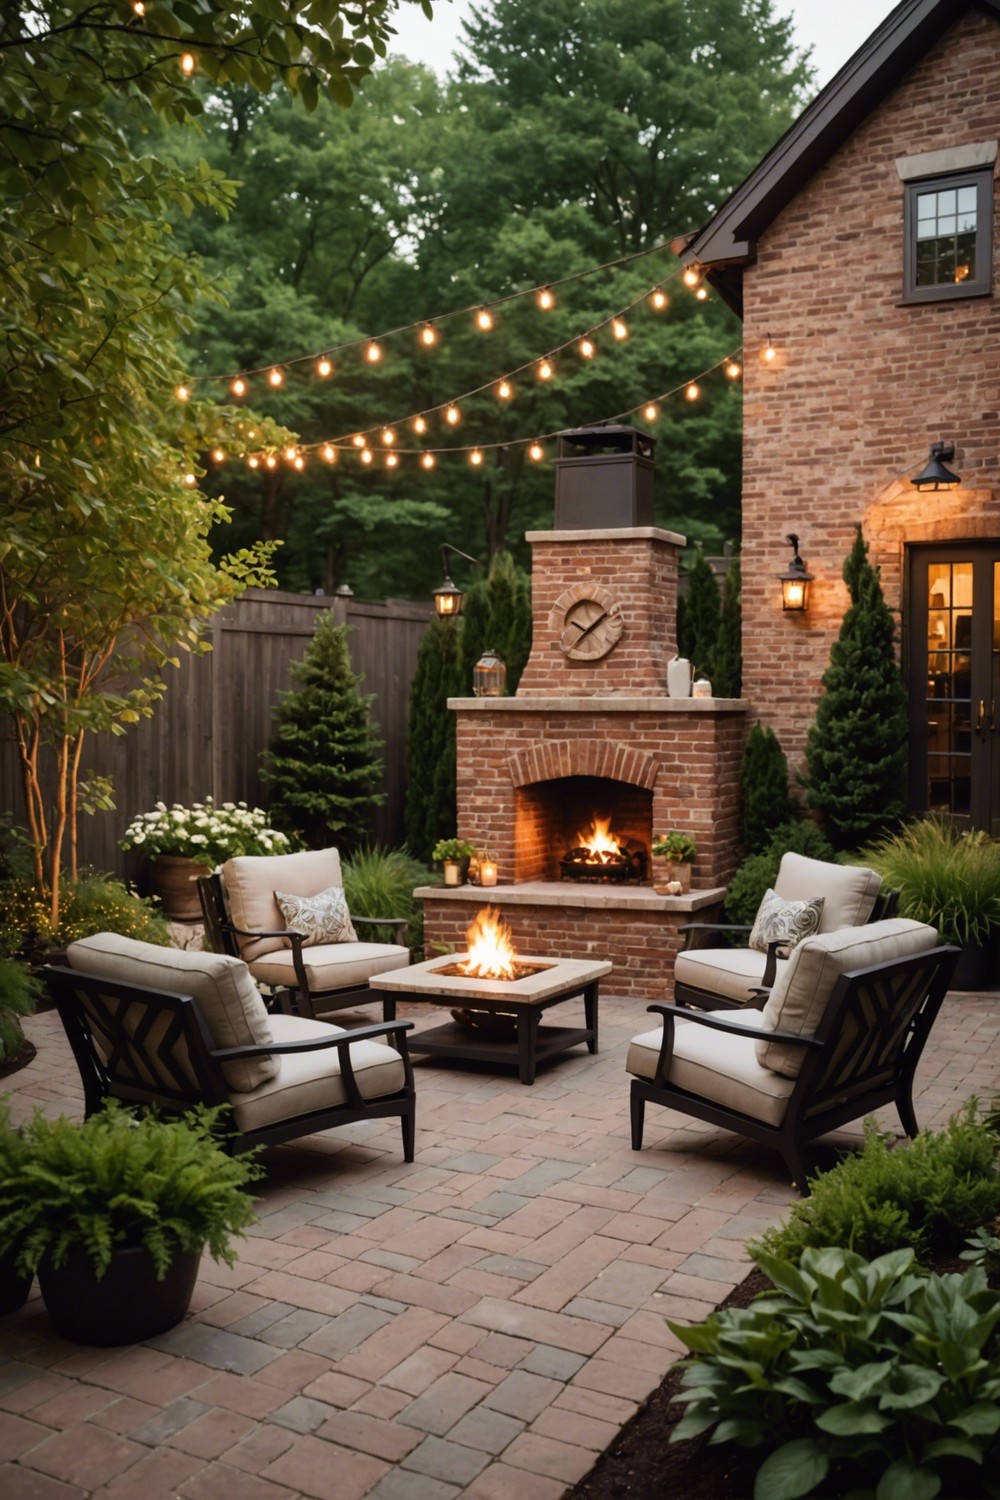 Brick Patio with Built-In Outdoor Fireplace